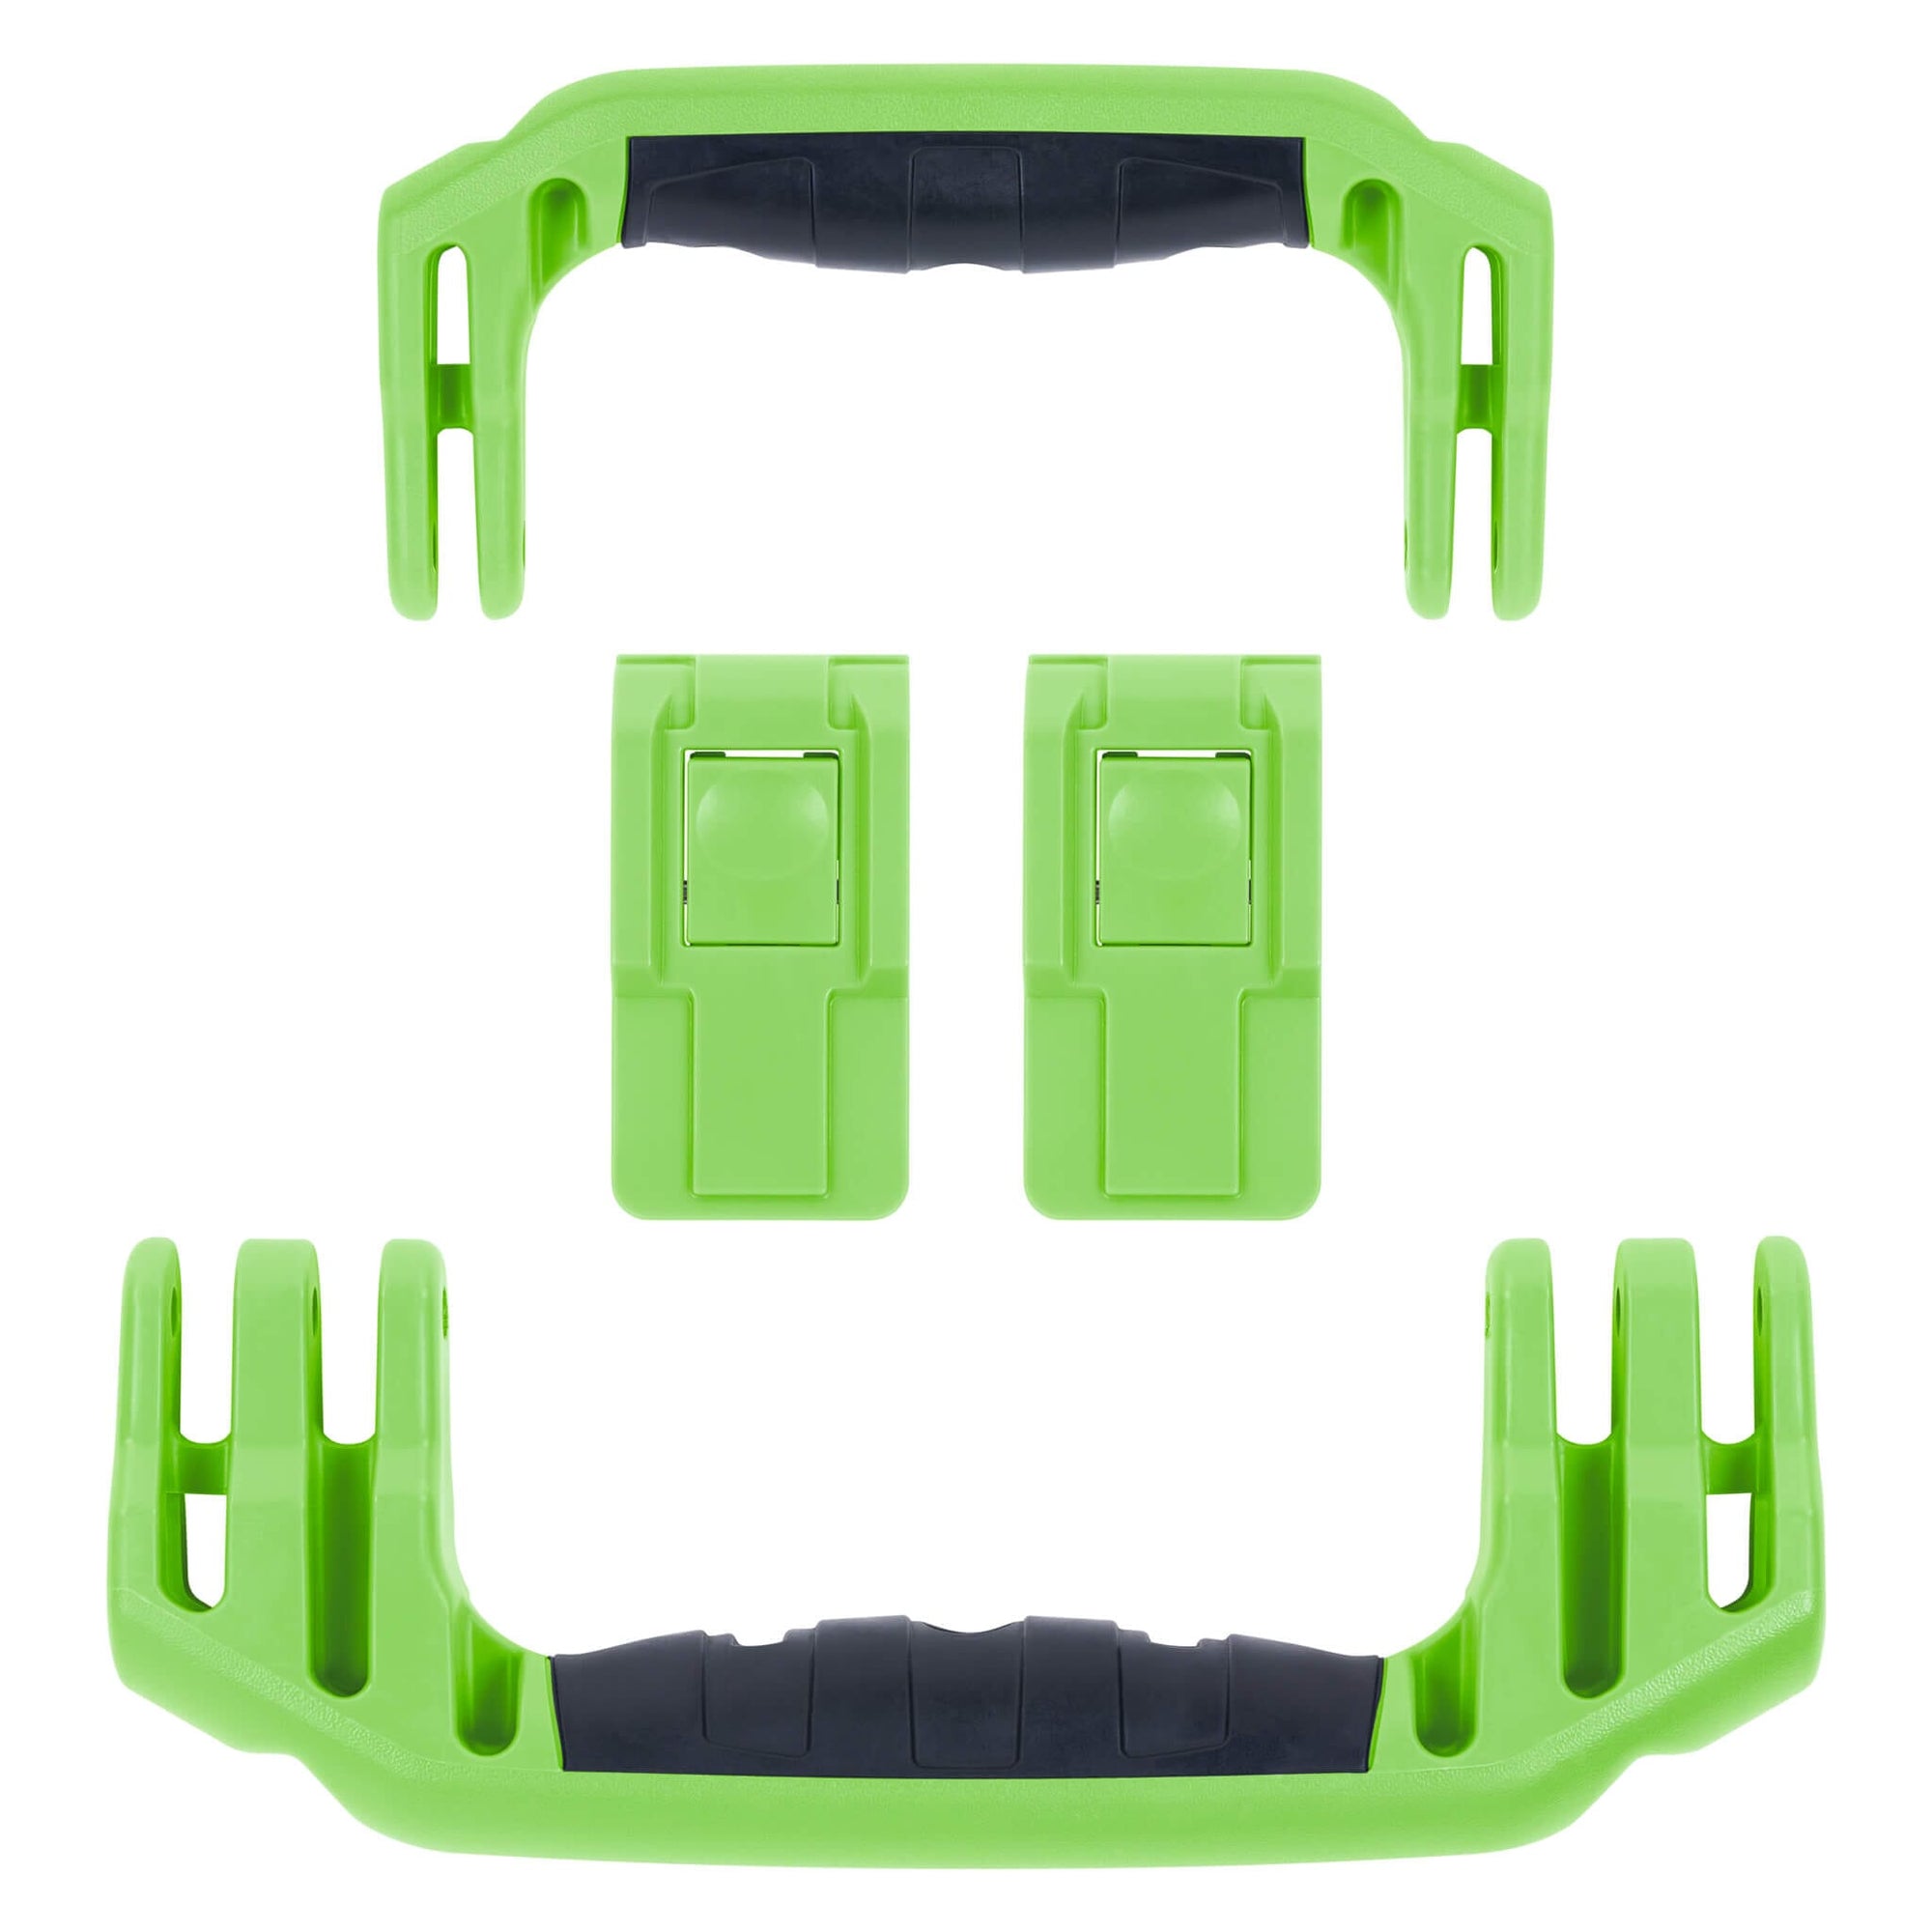 Pelican 1556 Air Replacement Handles & Latches, Lime Green (Set of 2 Handles, 2 Latches) ColorCase 